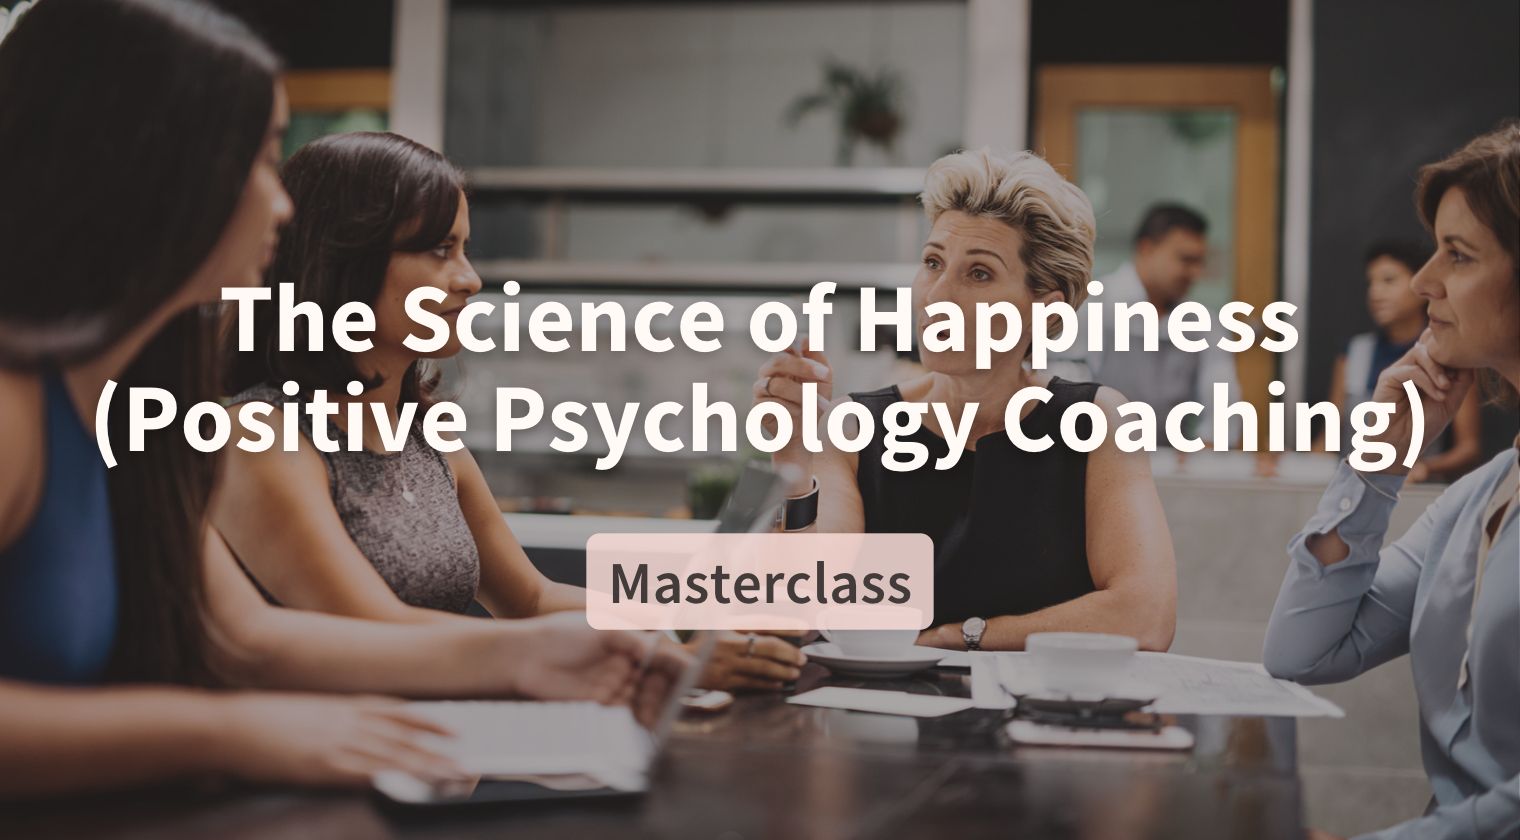 he Science of Happiness (Positive Psychology Coaching)